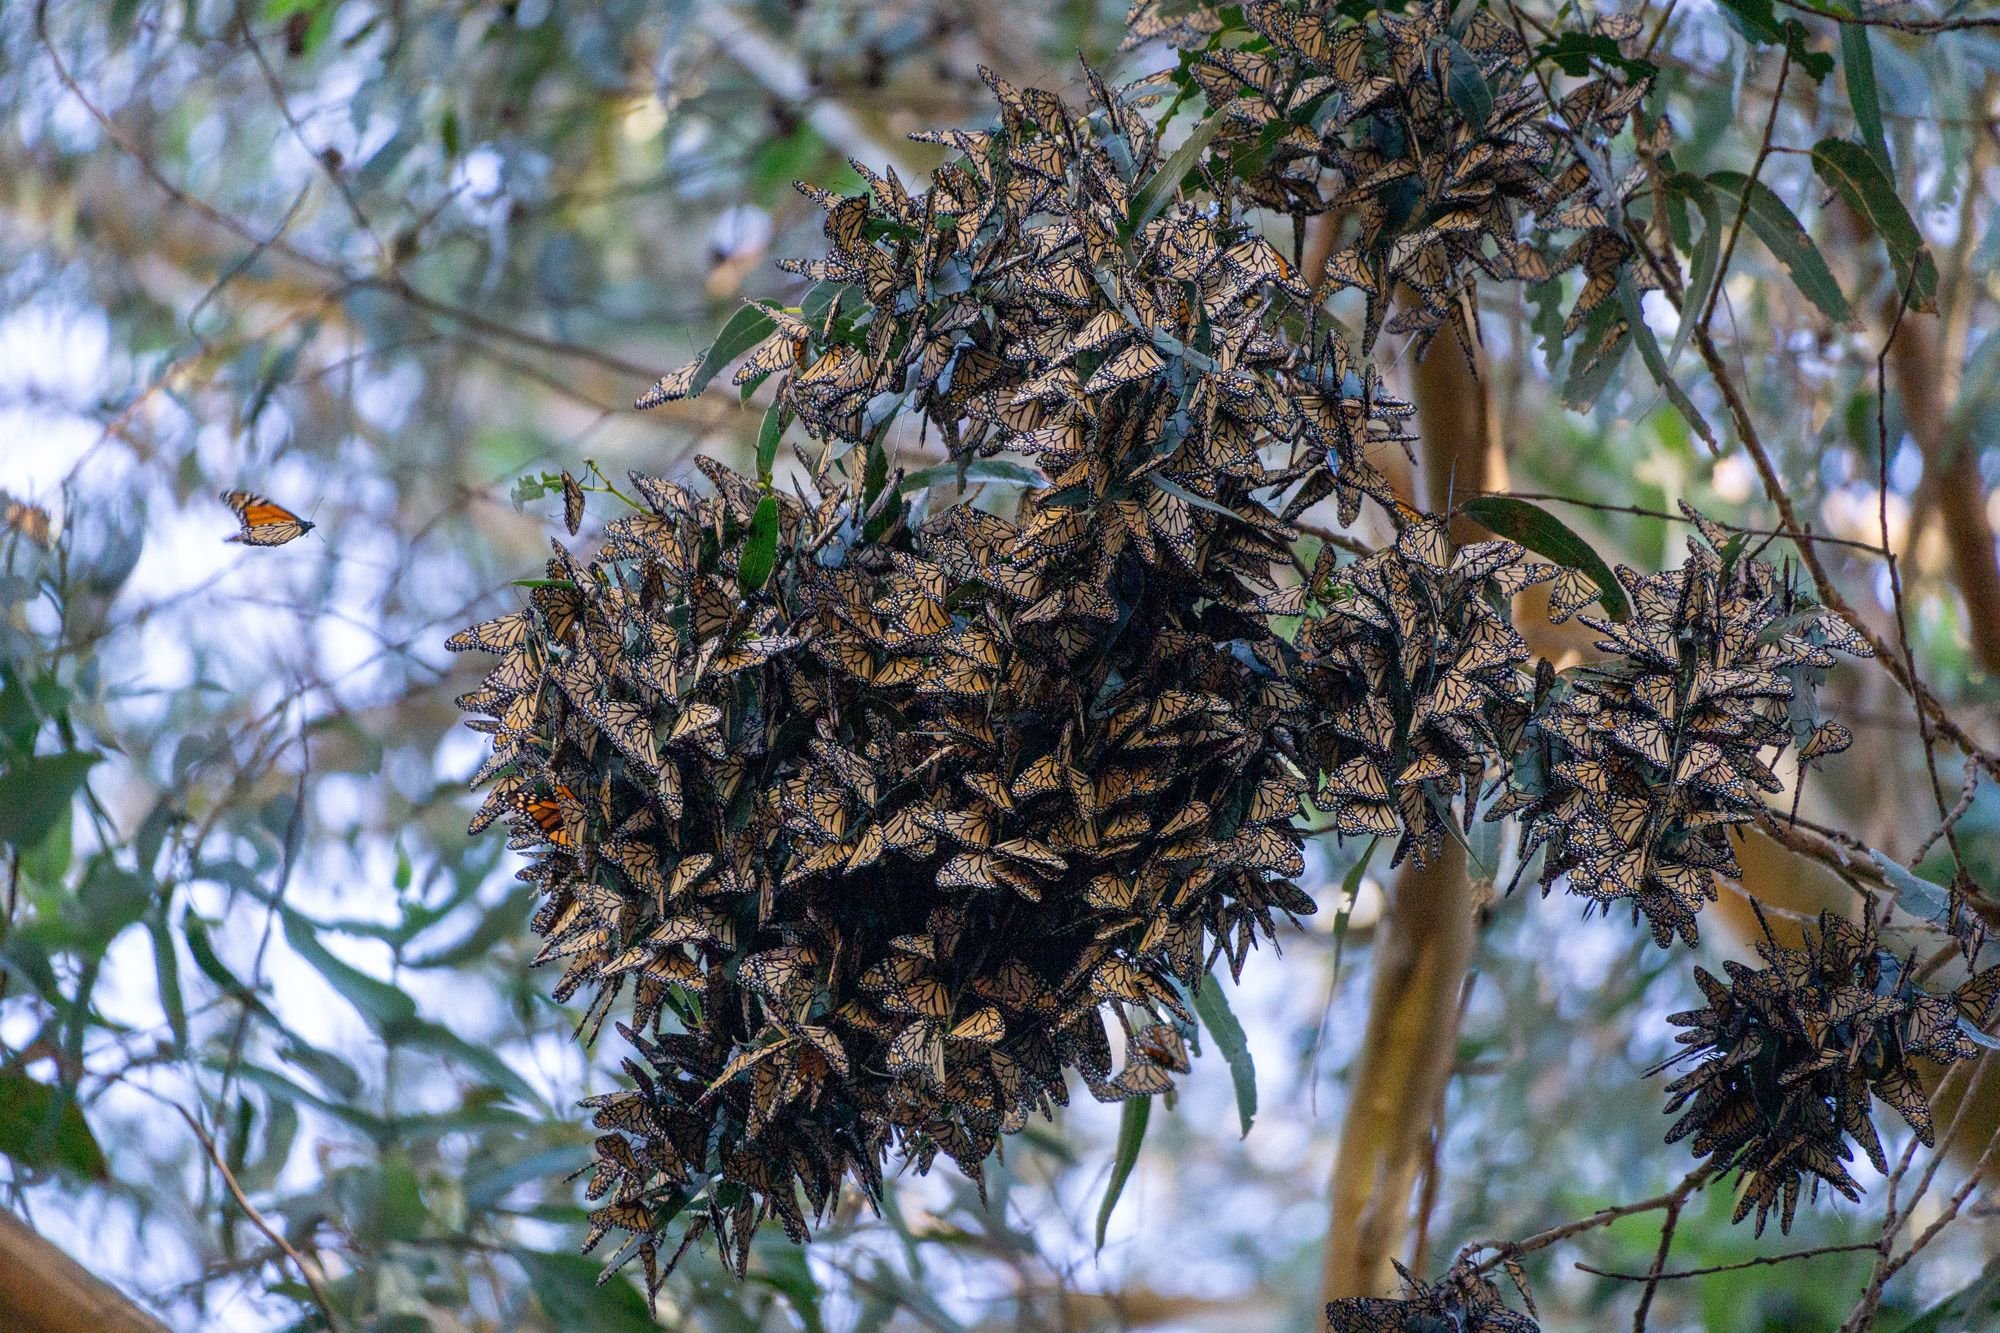 A close up of a cluster of monarch butterflies in the trees.